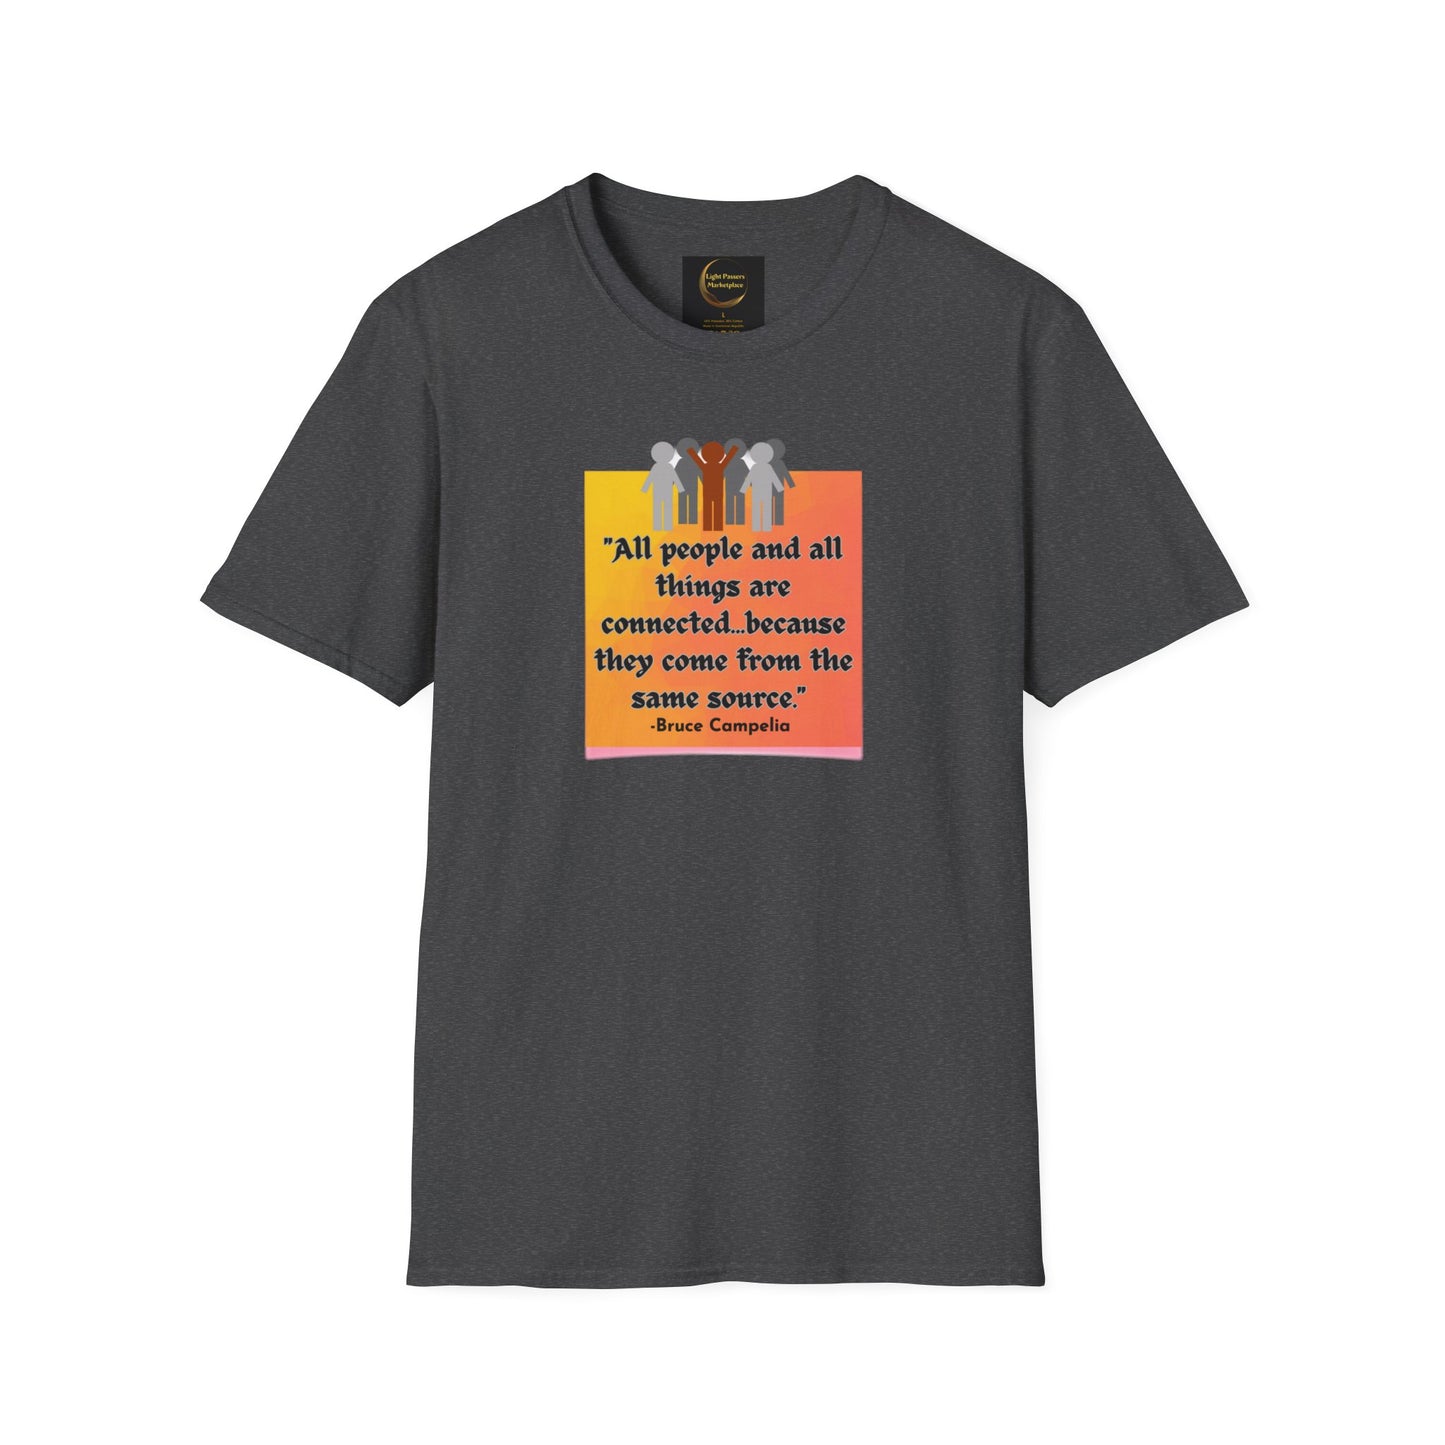 Light Passers Marketplace All People are connected orange plaque Unisex Soft Cotton T-shirt Inspirational Messages, Simple Messages, Mental Health, Diversity